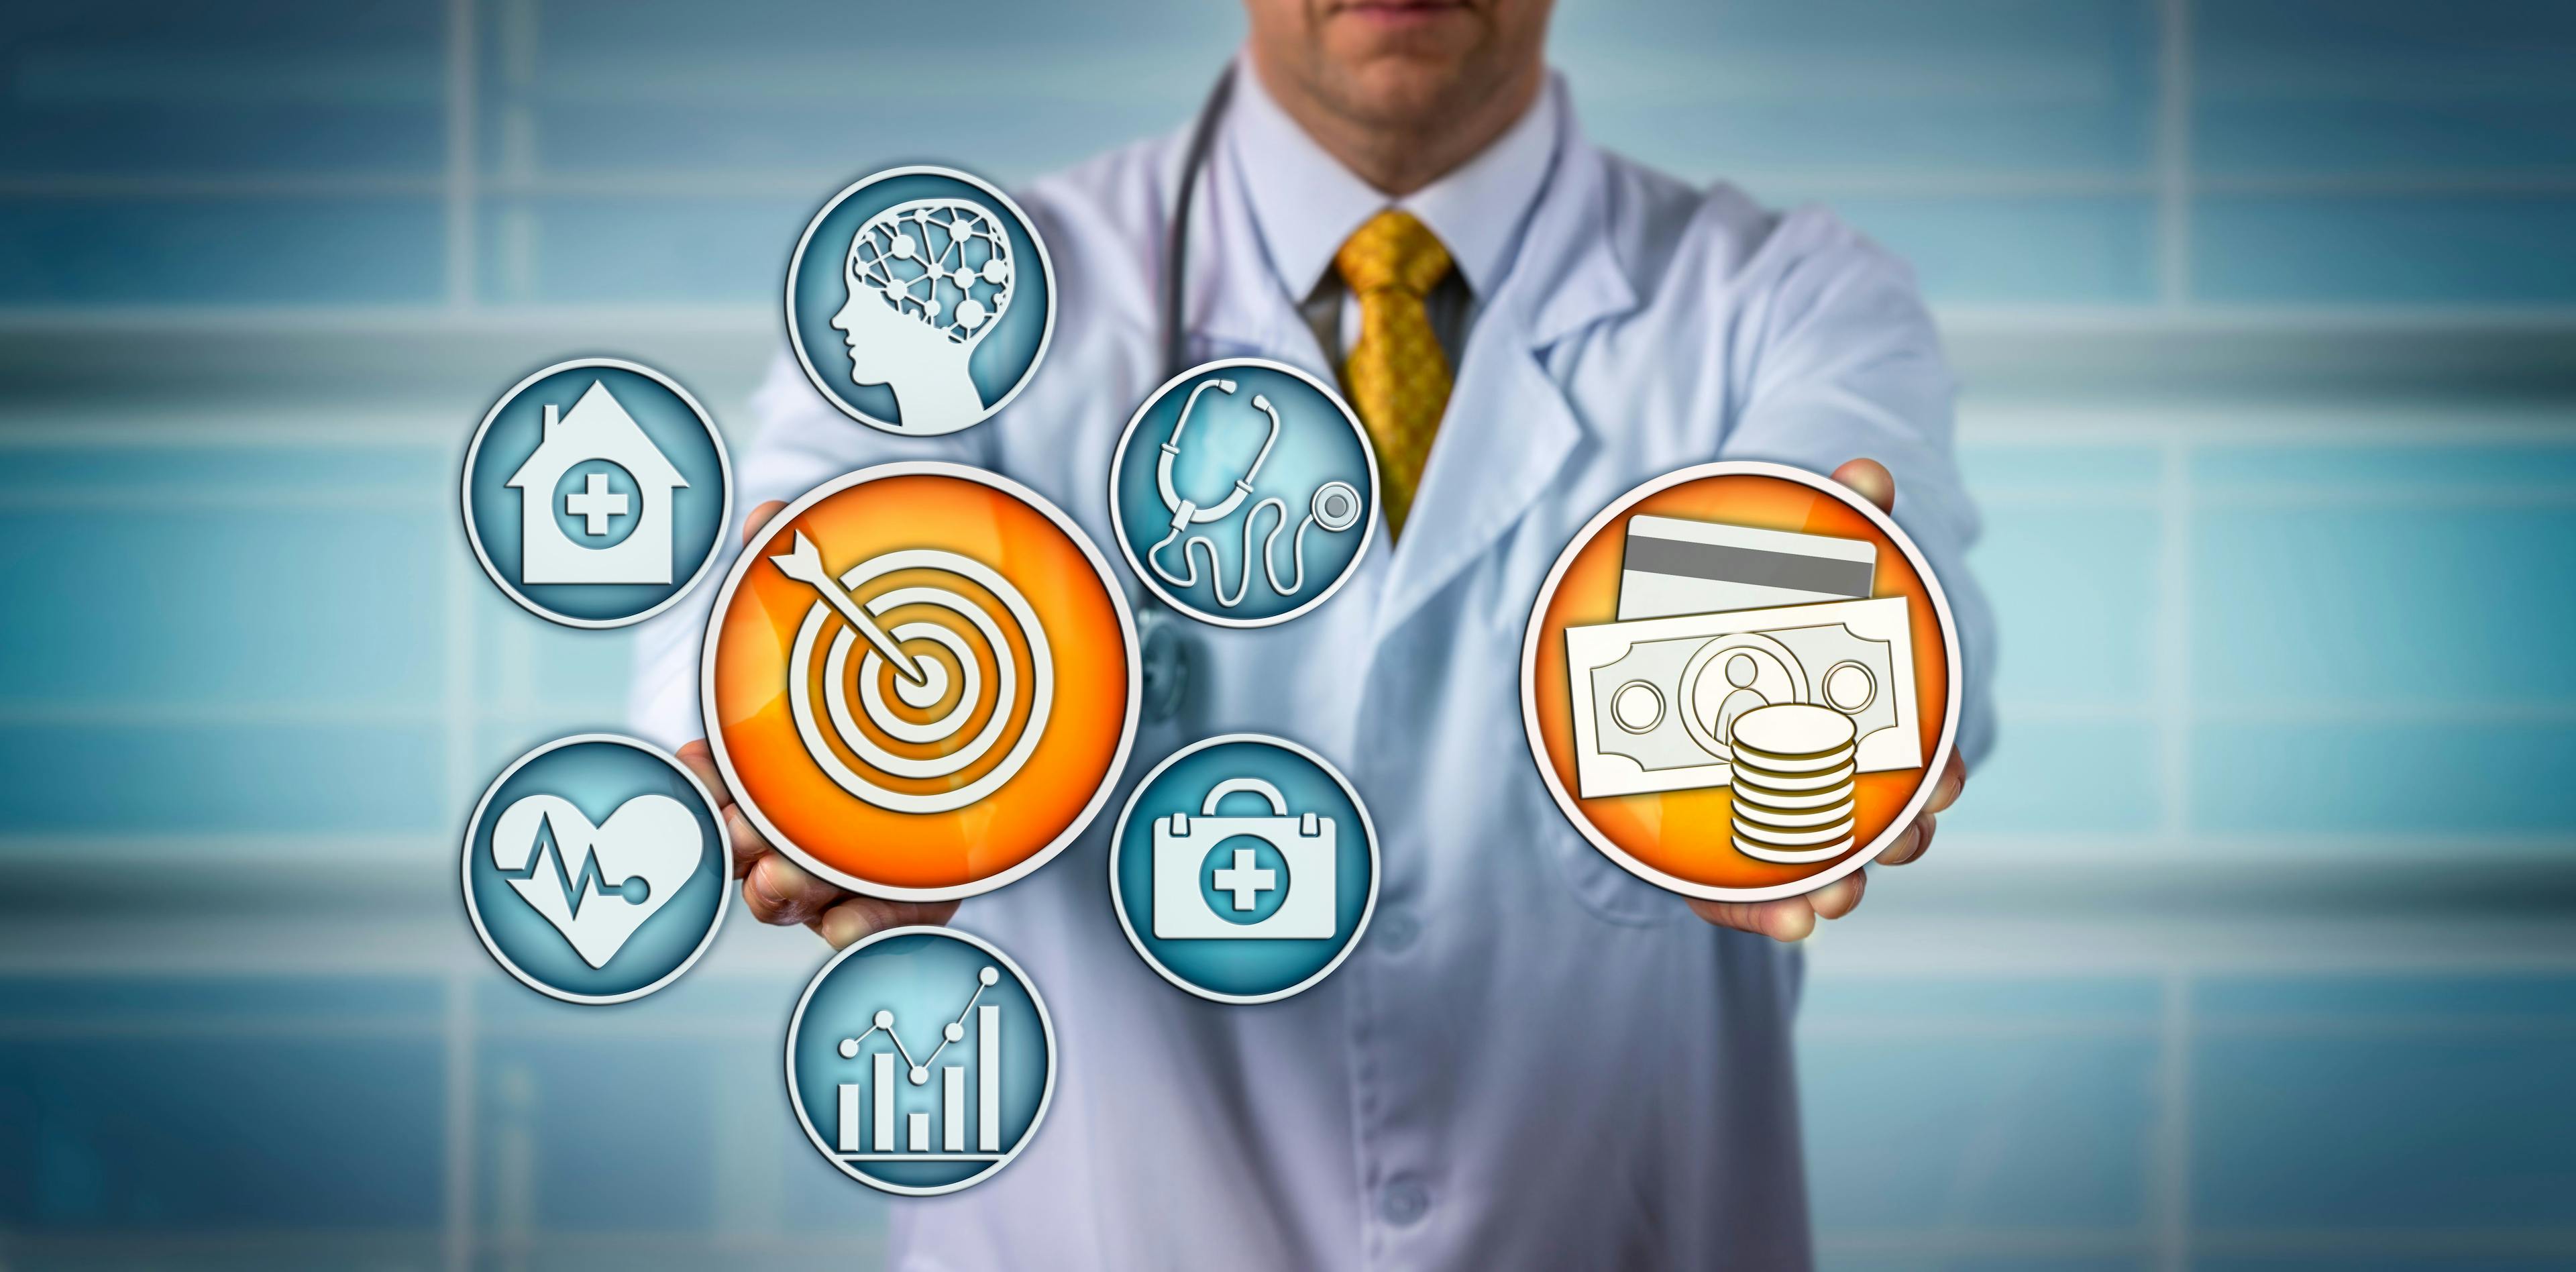 doctor with images representing value-based care ©leowolfert-stock.adobe.com